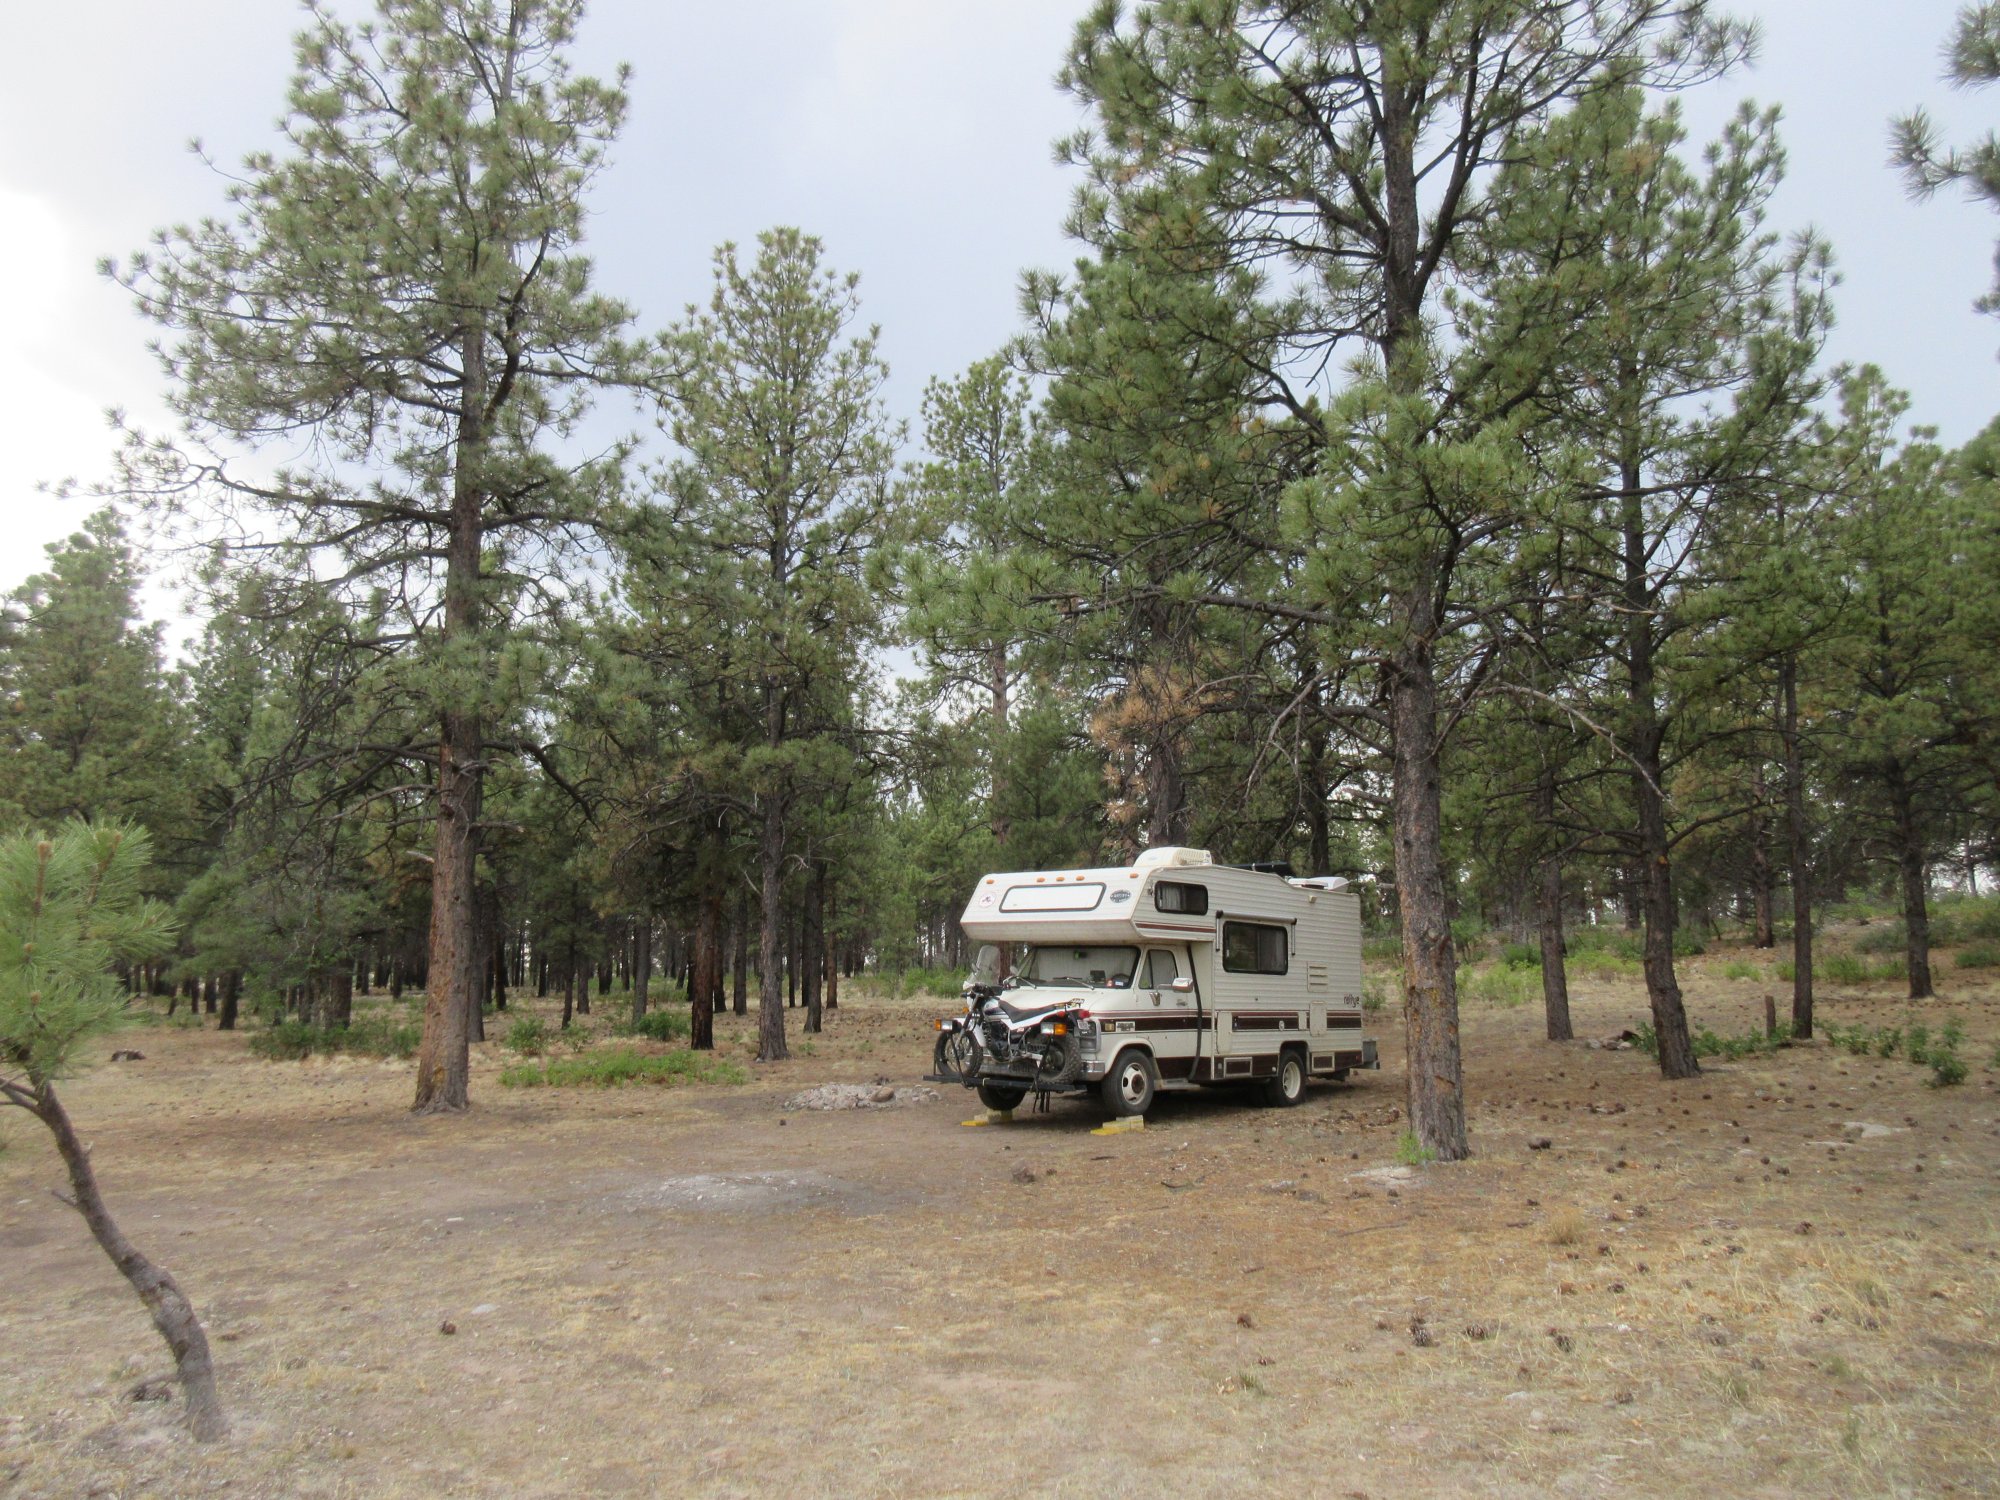 Protecting Our Public Lands: The RVers Boondocking Policy 4